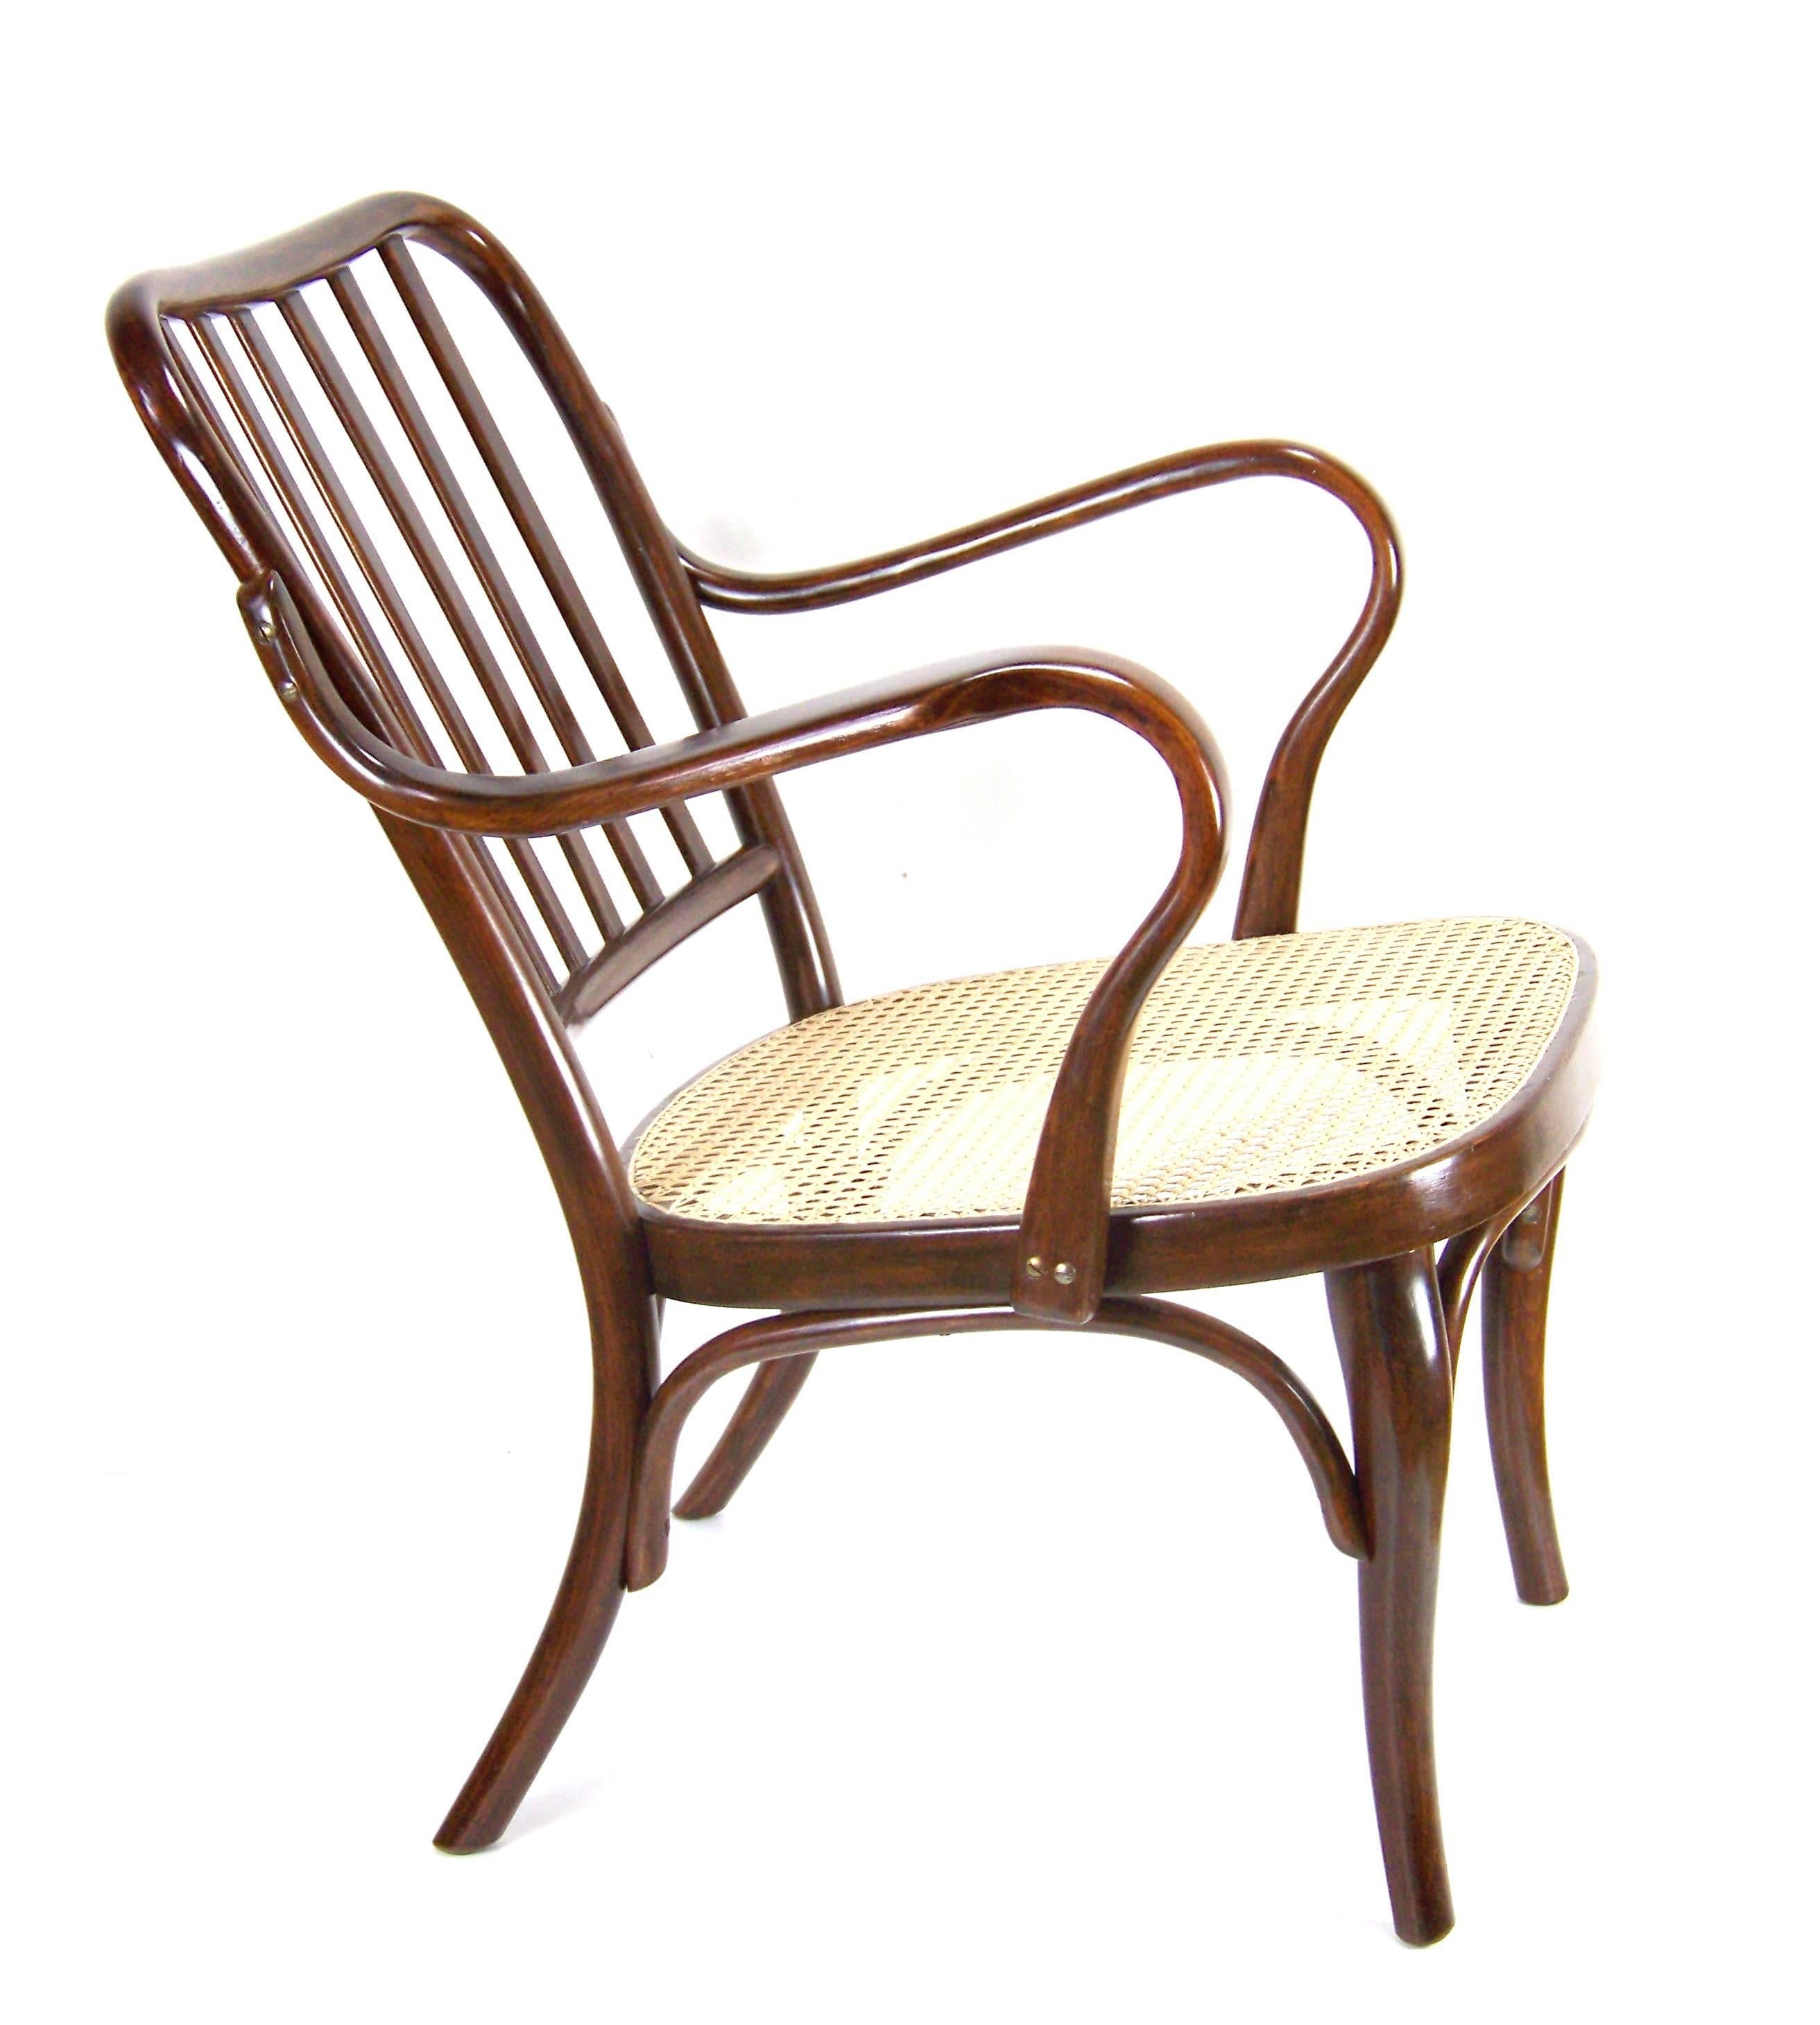 Designed by Frank Josef in year 1933. Manufactured in Czechoslovakia by the Thonet-Mundus company. Marked with stamp THONET. Armchair was cleaned and gentle re-polished with shellack finish. New cannung in seat.